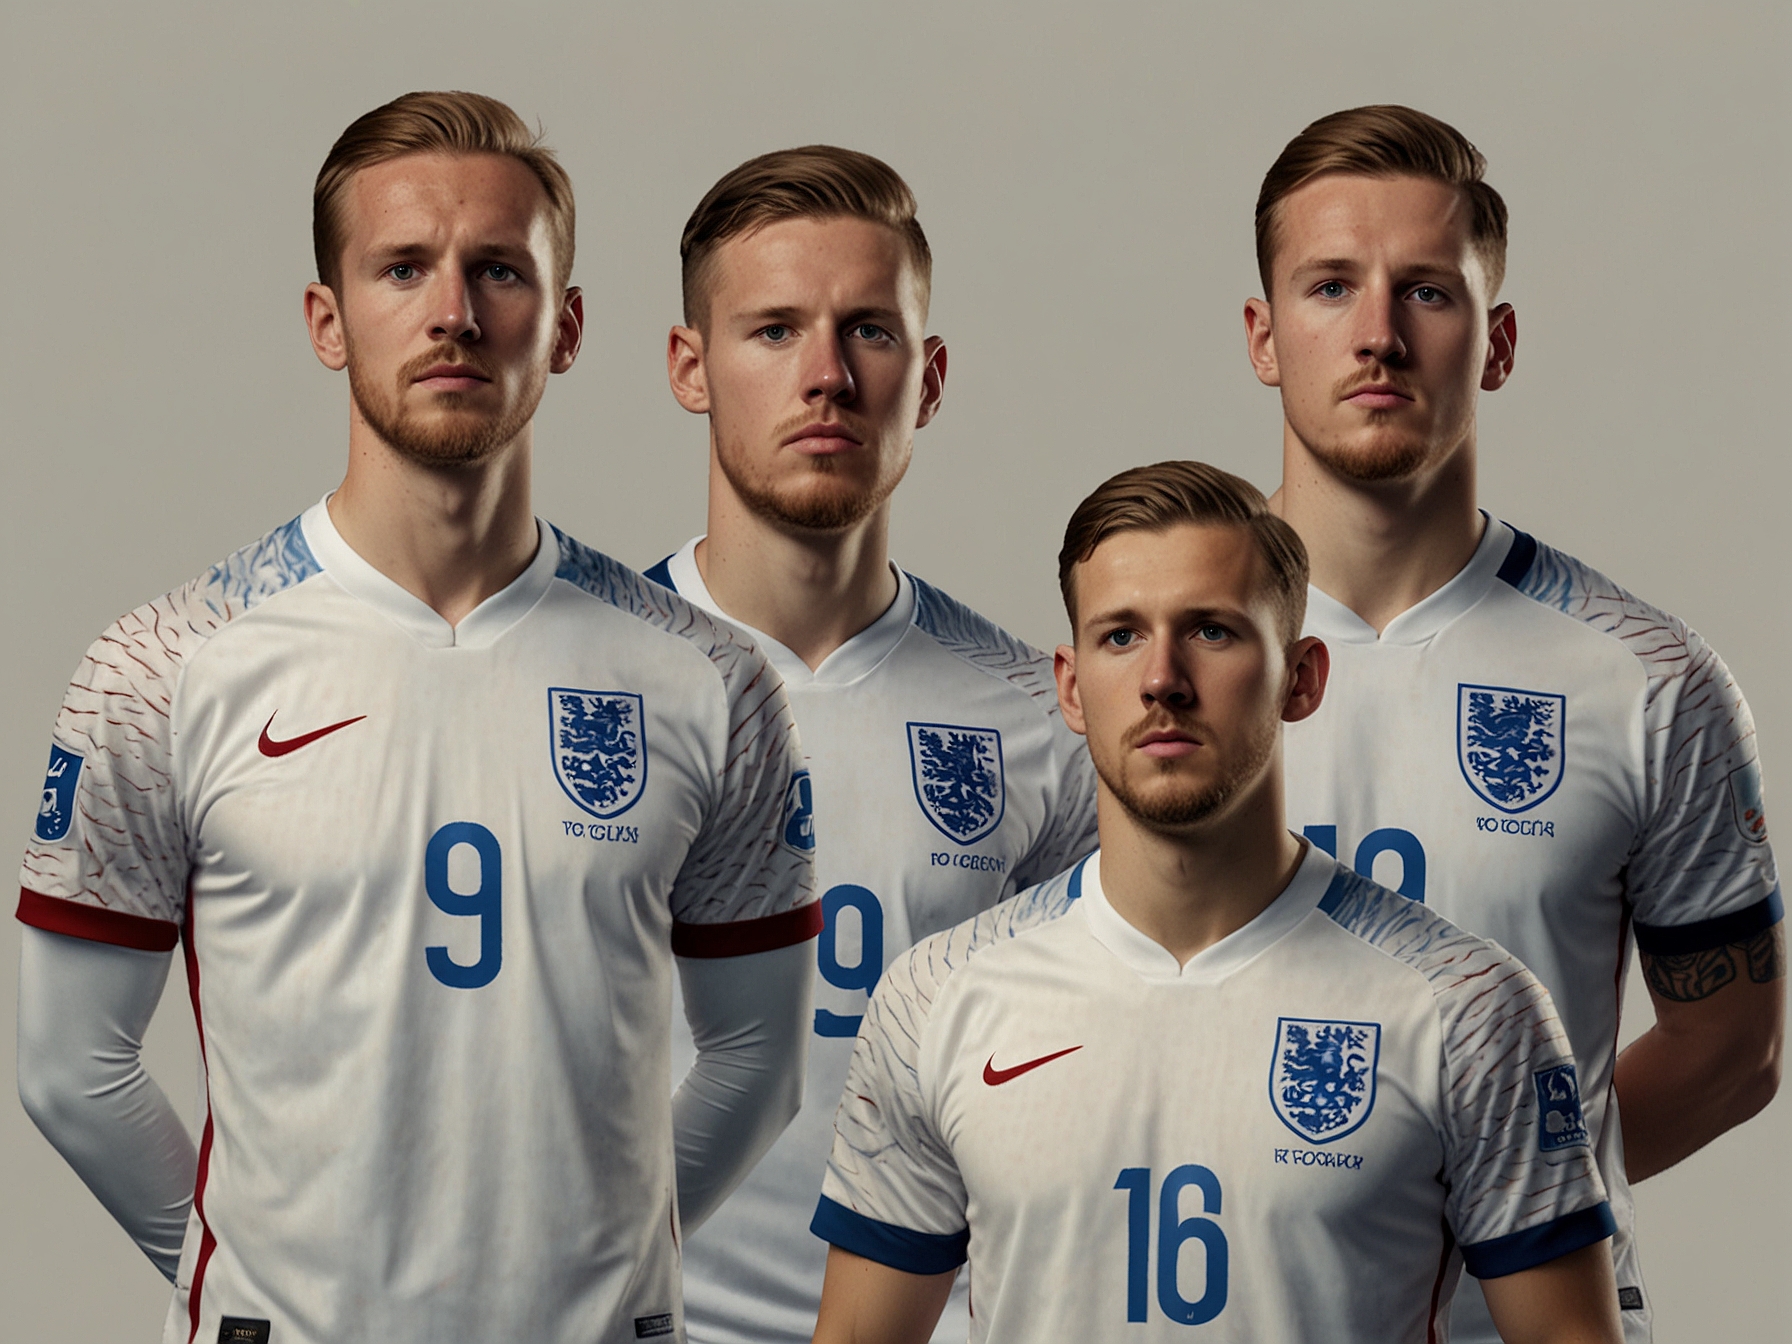 An image of England's probable starting eleven against Slovenia, showing key players like Harry Kane, Jordan Pickford, and Declan Rice in their likely positions, set in a 4-3-3 formation.